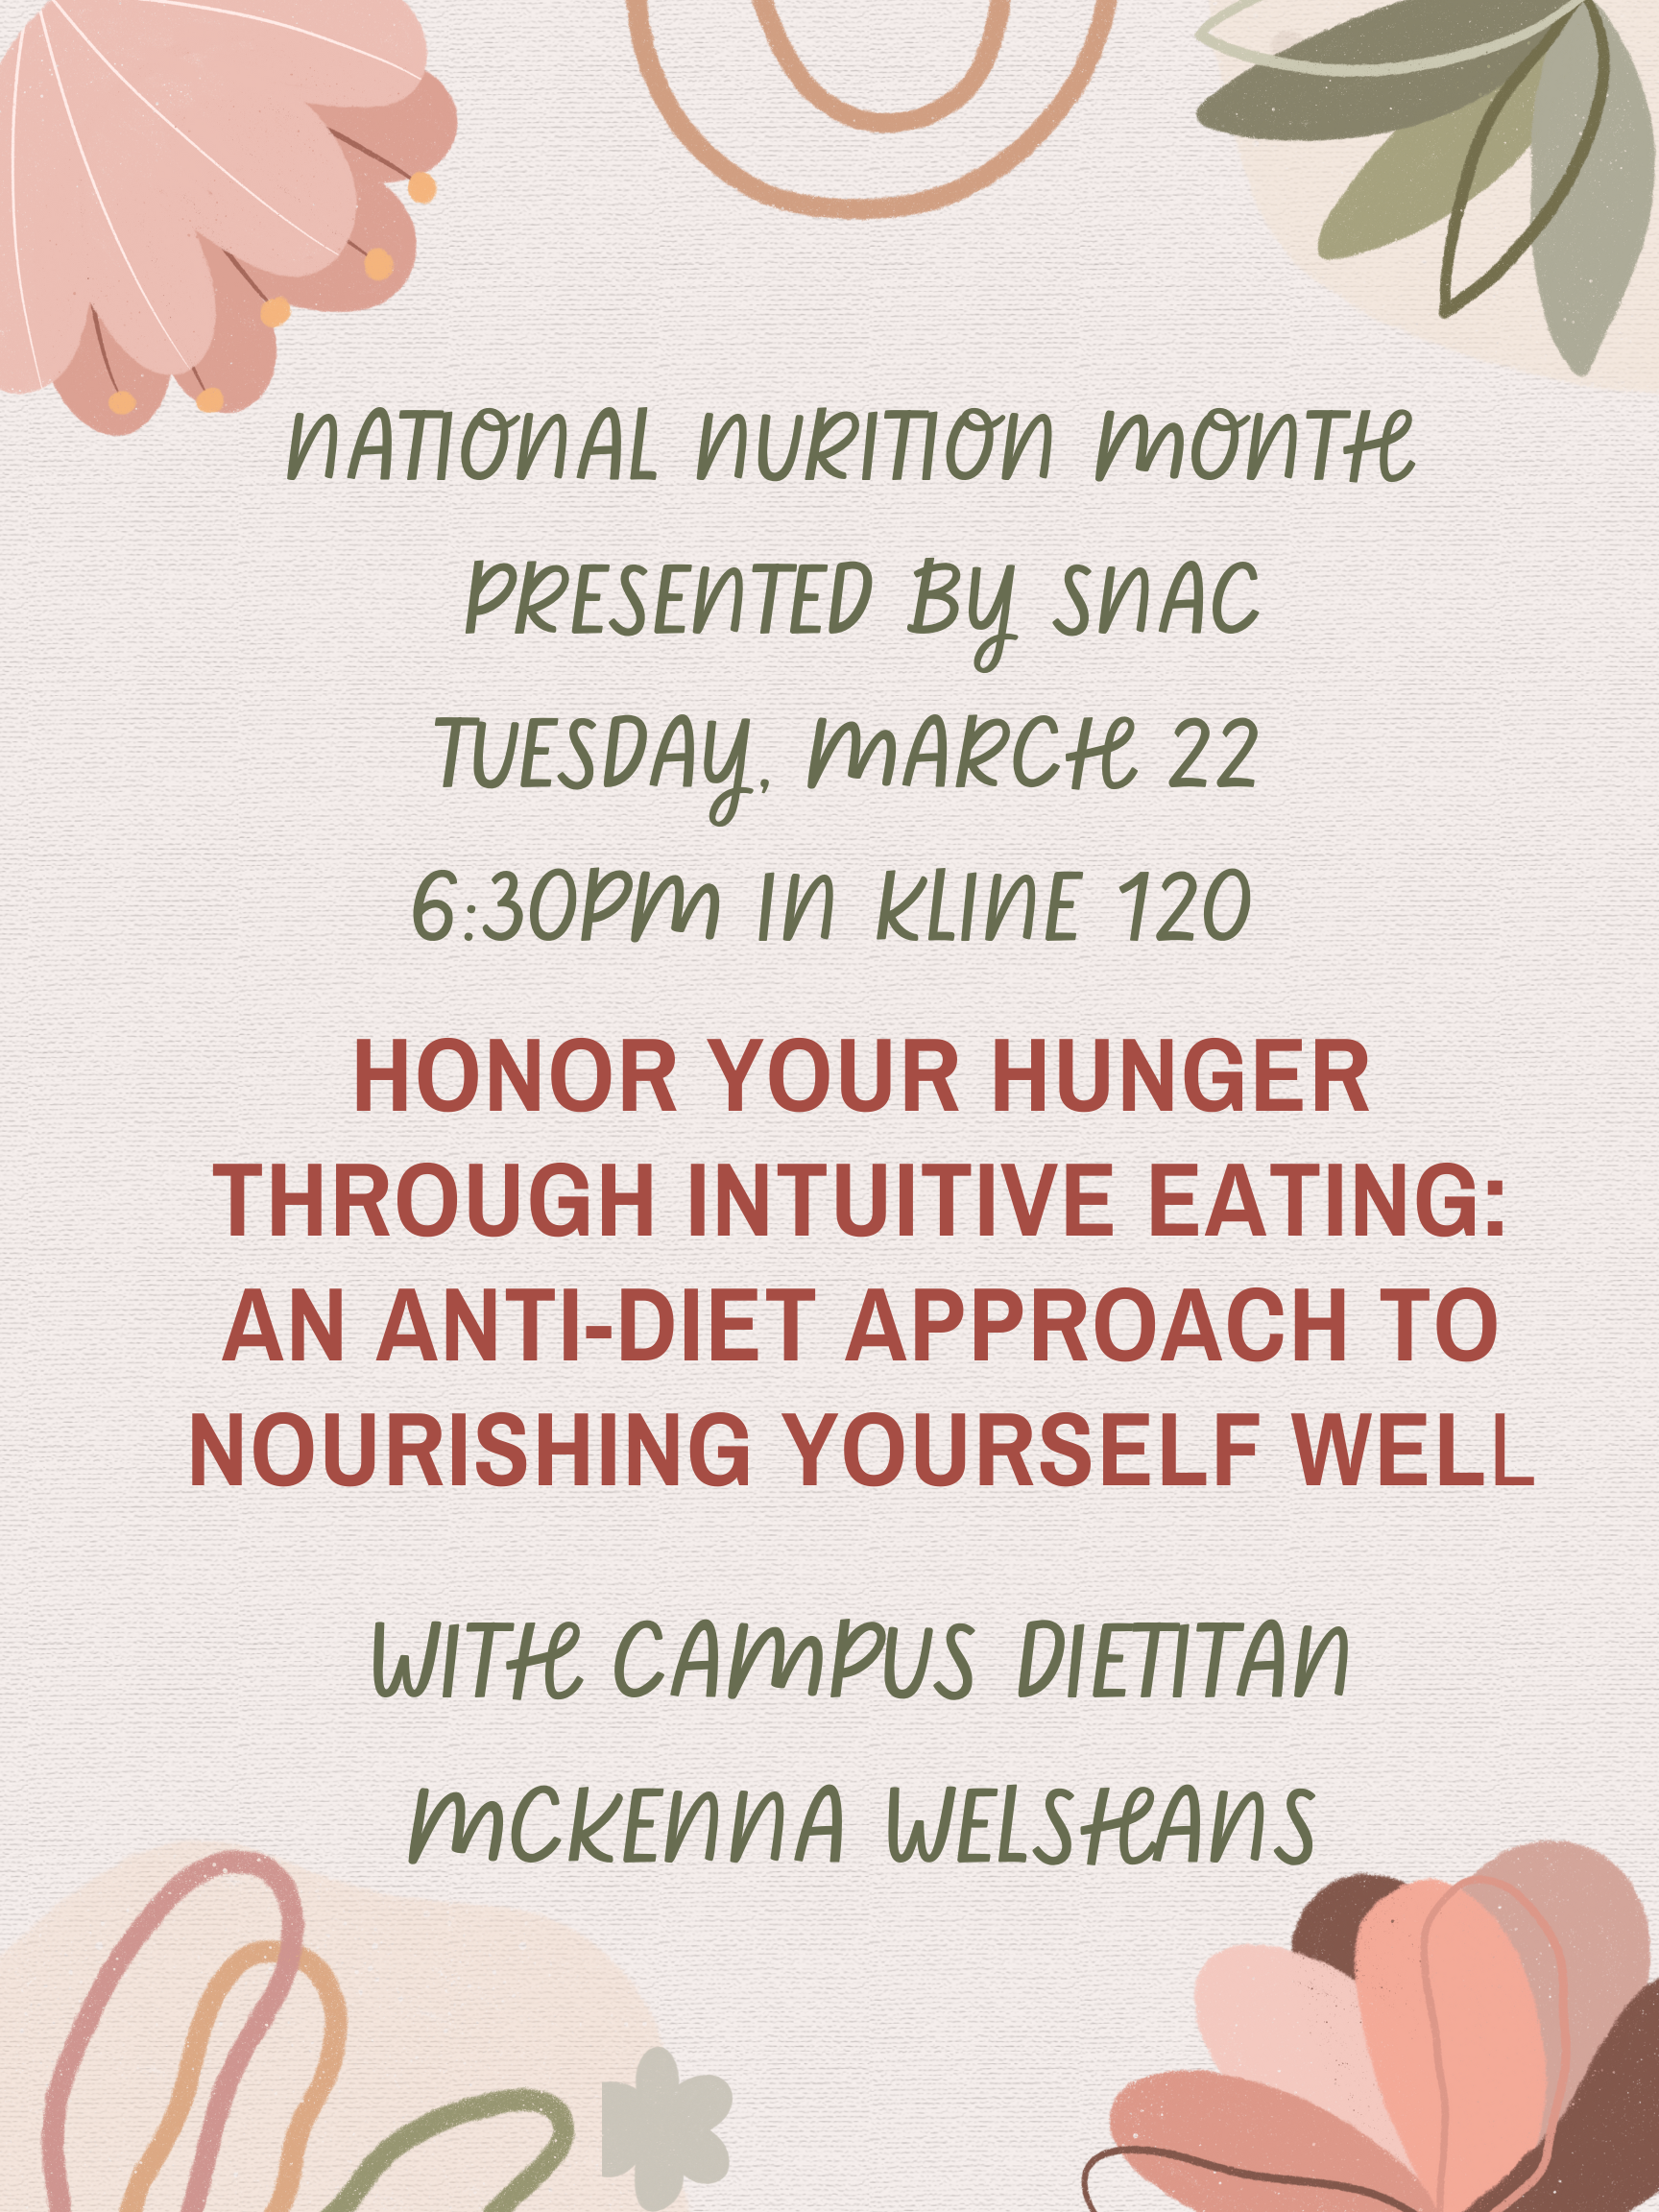 Nutrition event 1 poster